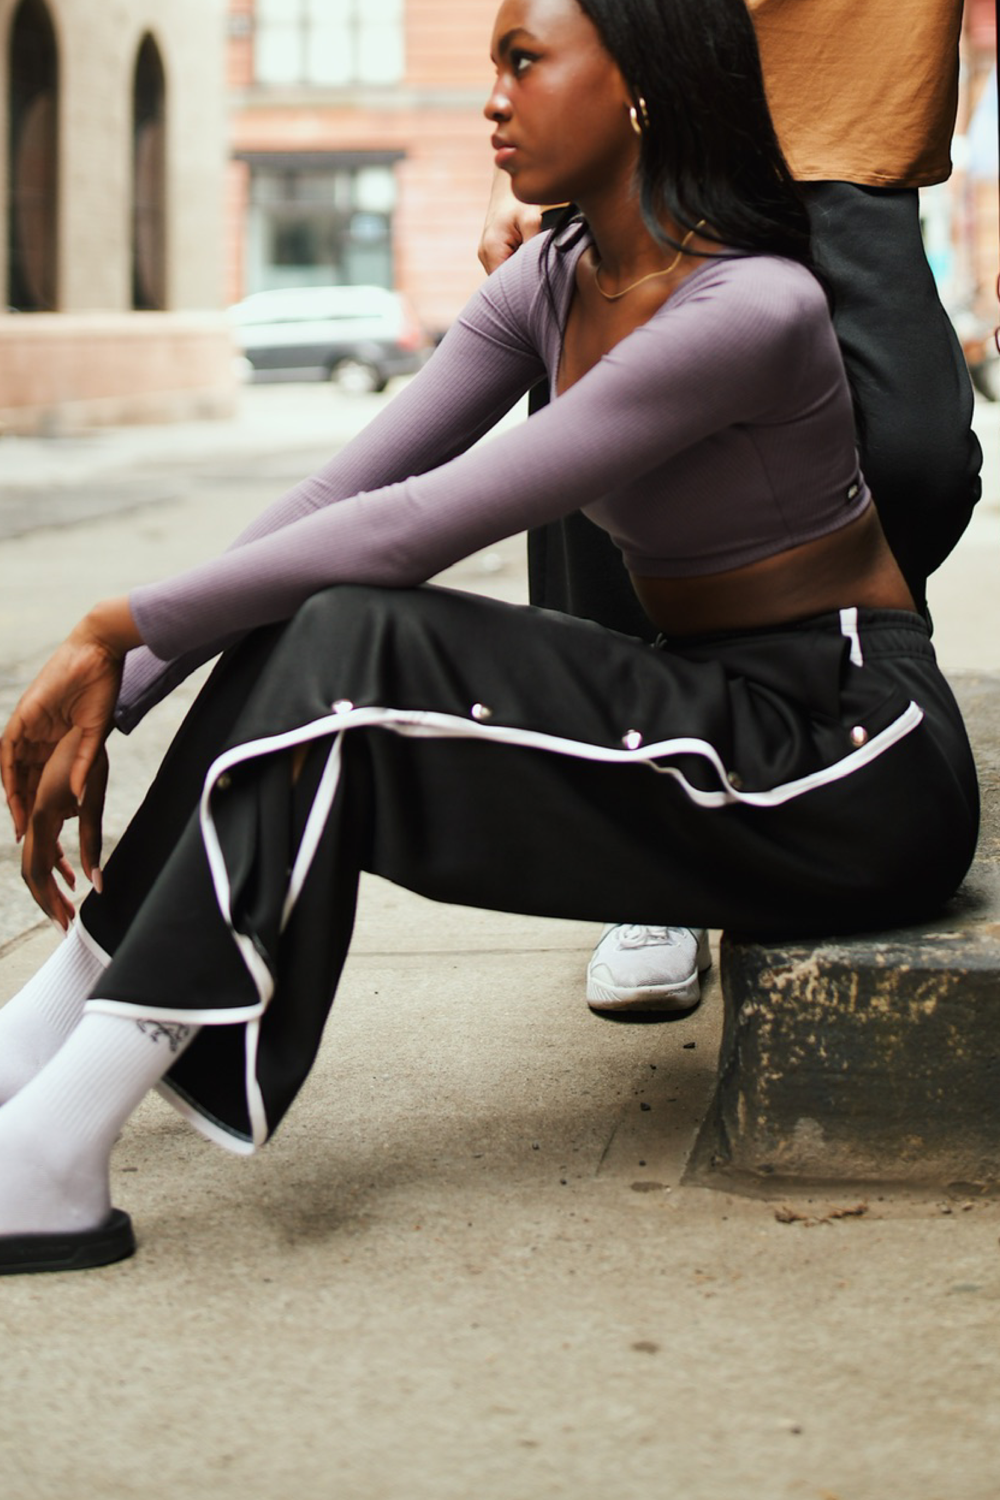 Fila Track pants and sweatpants for Women, Online Sale up to 14% off